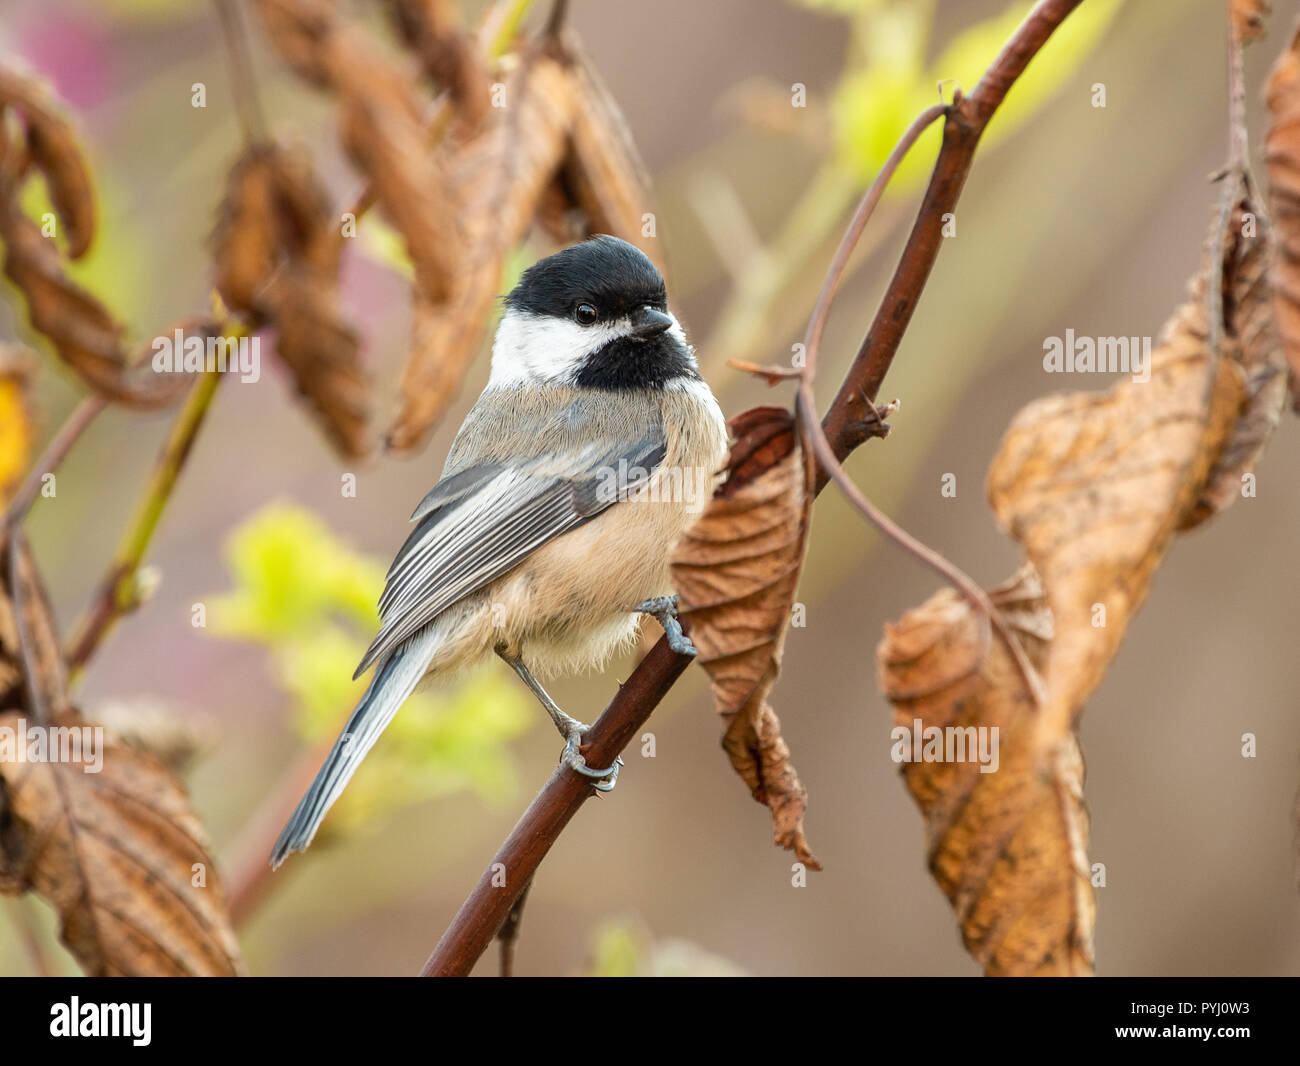 A Black-capped Chickadee (Poecile atricapillus) perched on a branch with dead autumn leaves. Stock Photo